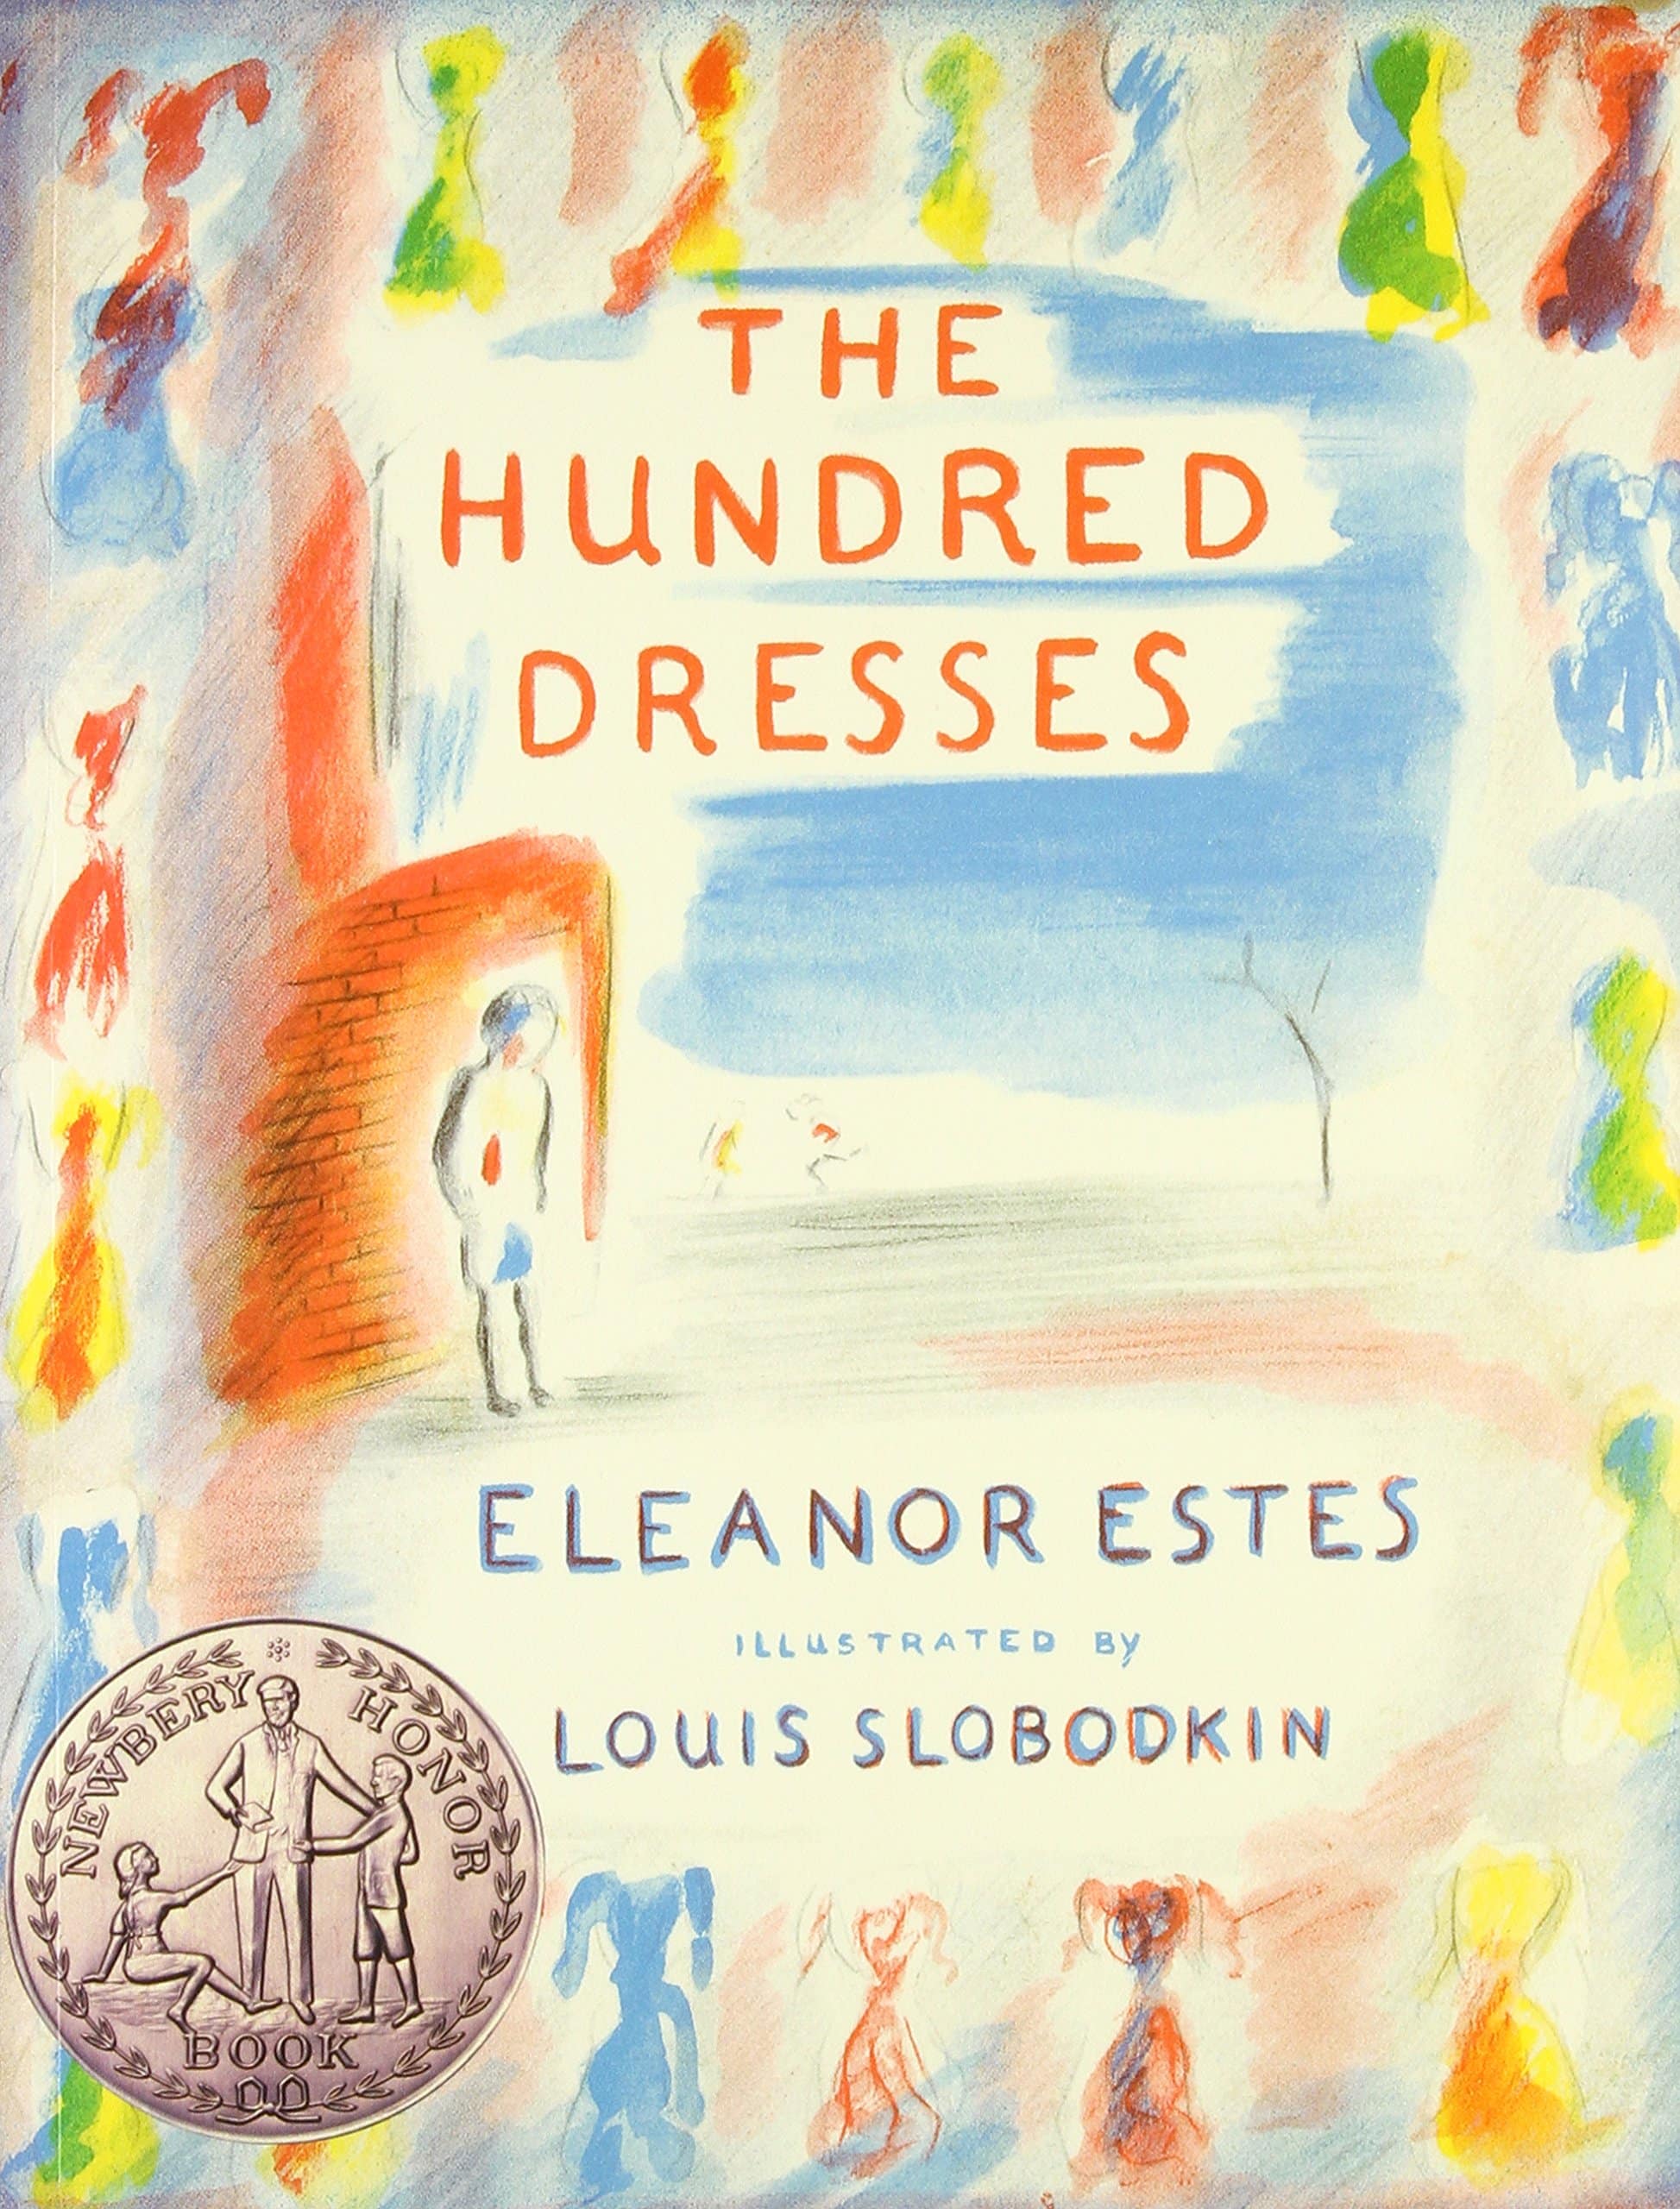 The cover for the book The Hundred Dresses